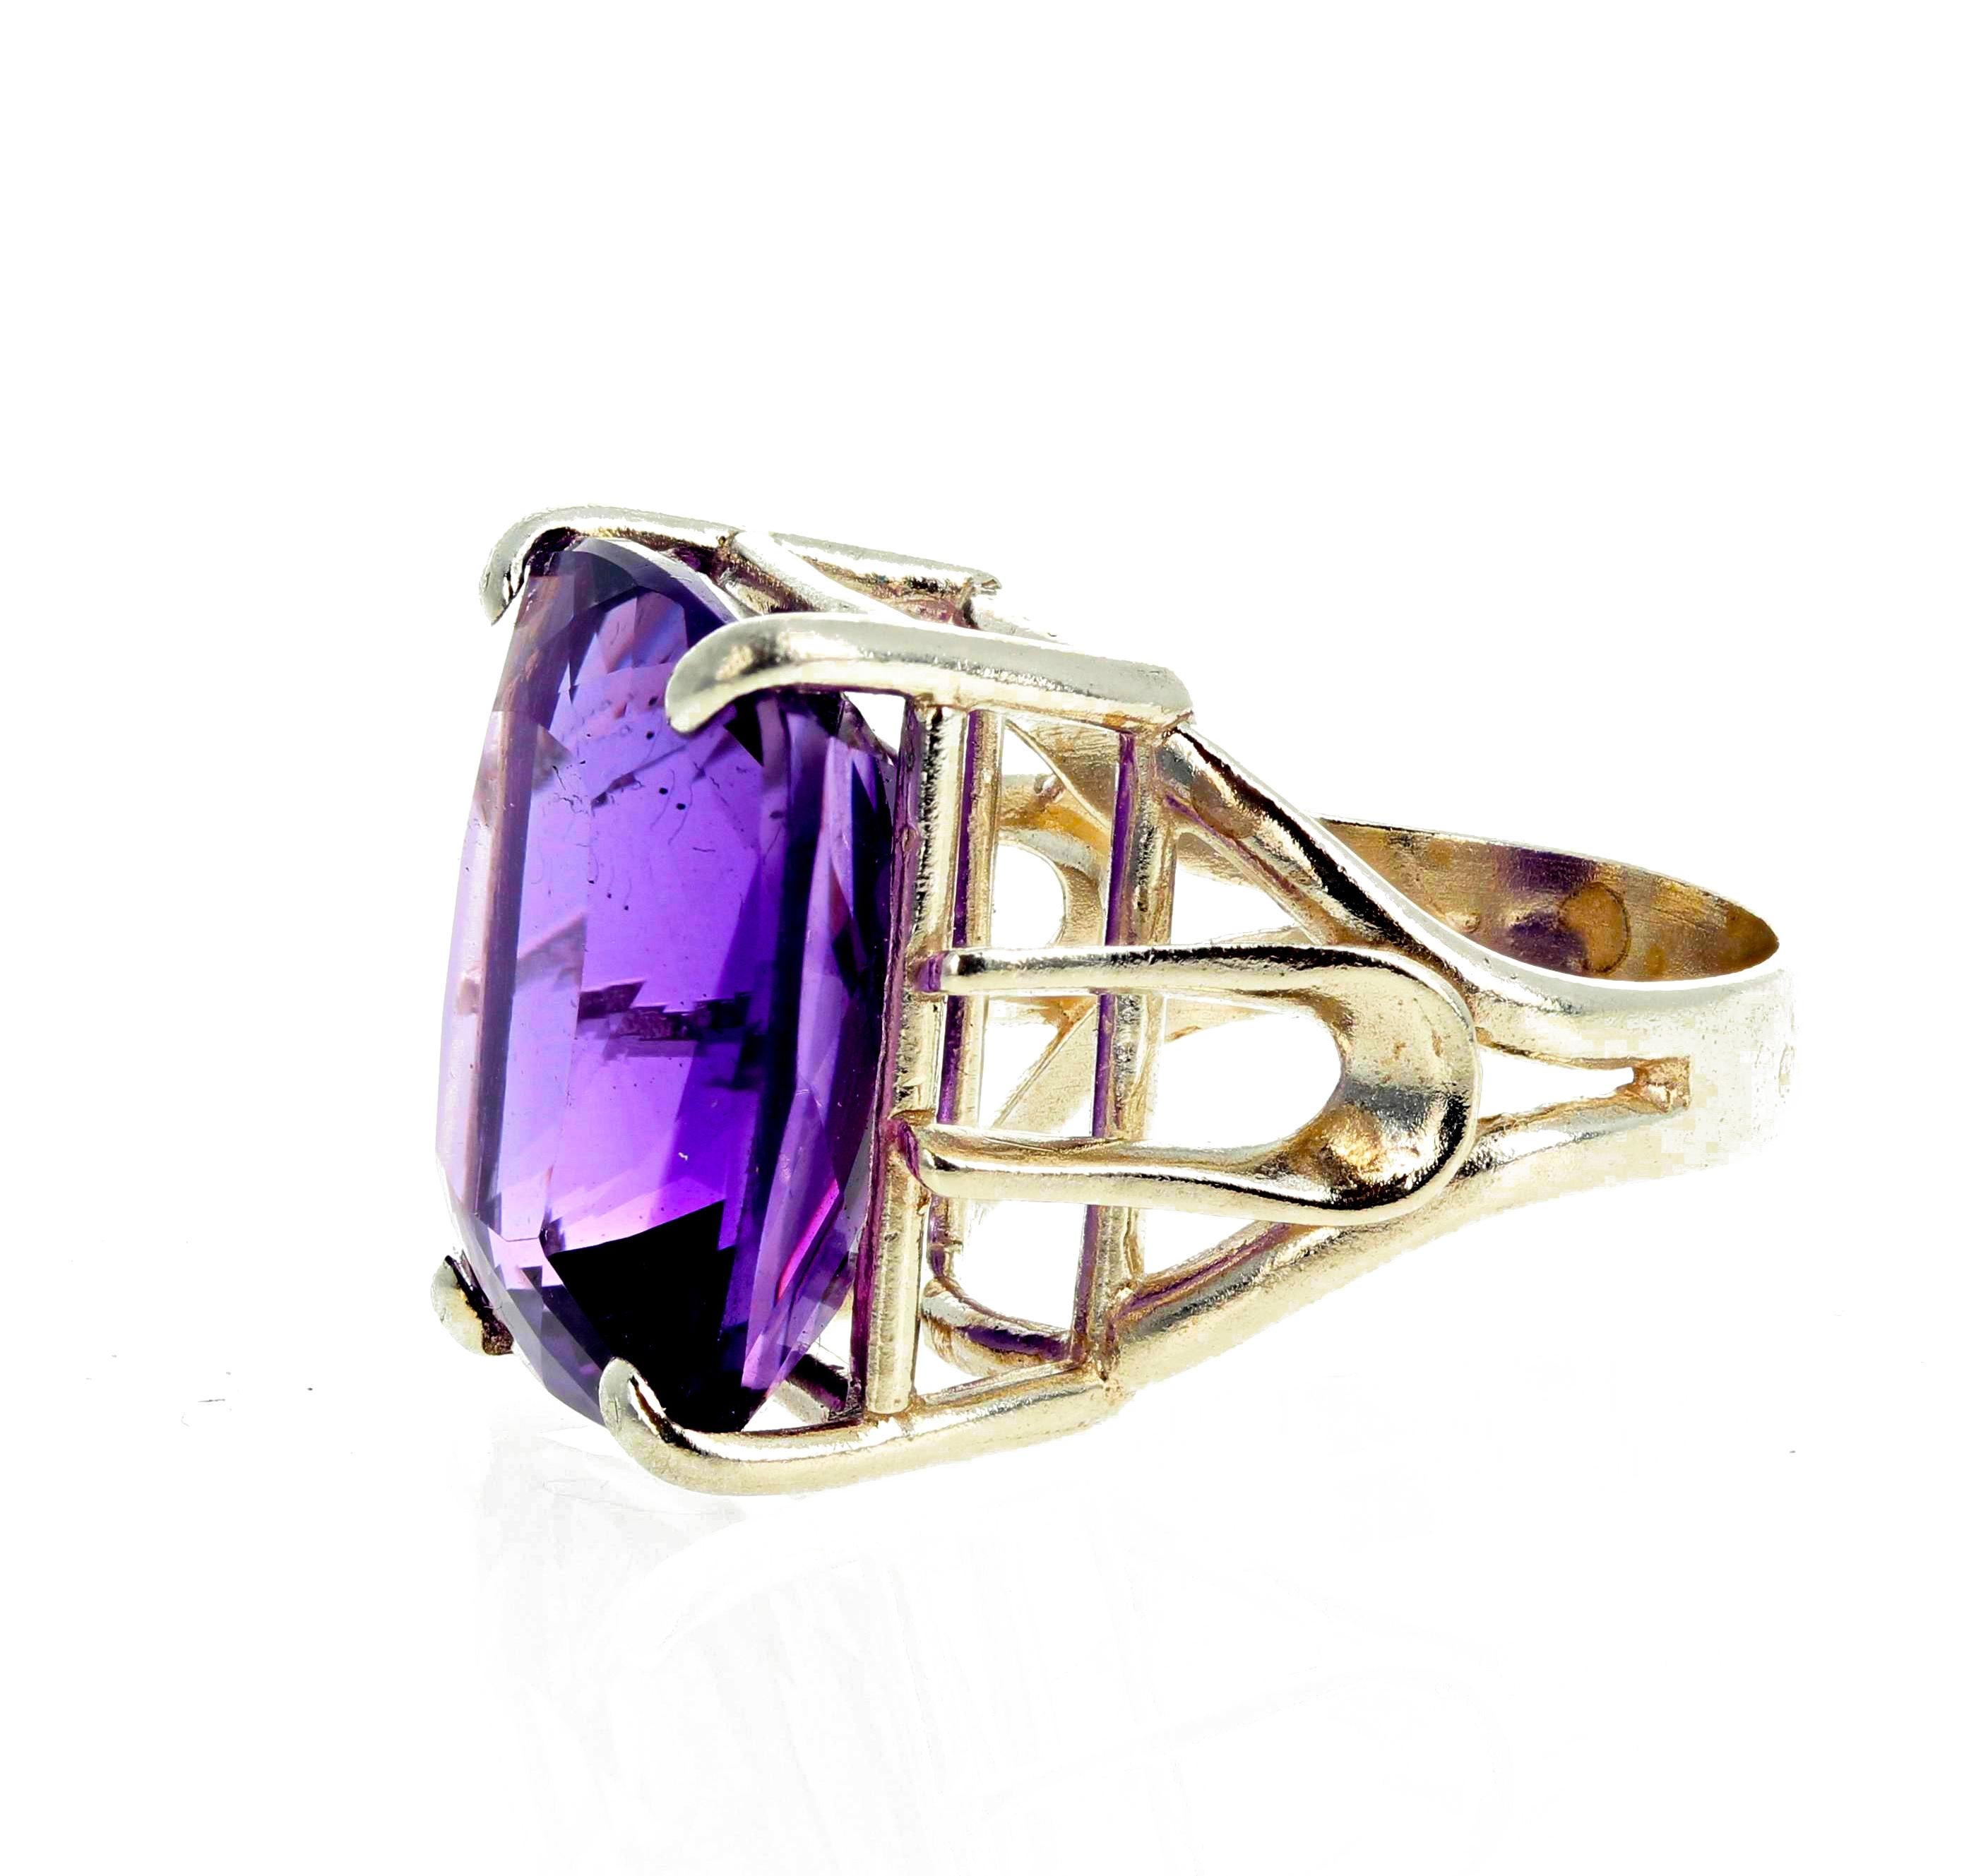 Gorgeous pinky flashing natural purple 19.55 carat Amethyst set in a Sterling Silver ring size 7 (sizable).  The Amethyst  is 19 mm x 15 mm and has no eye visible inclusions.   